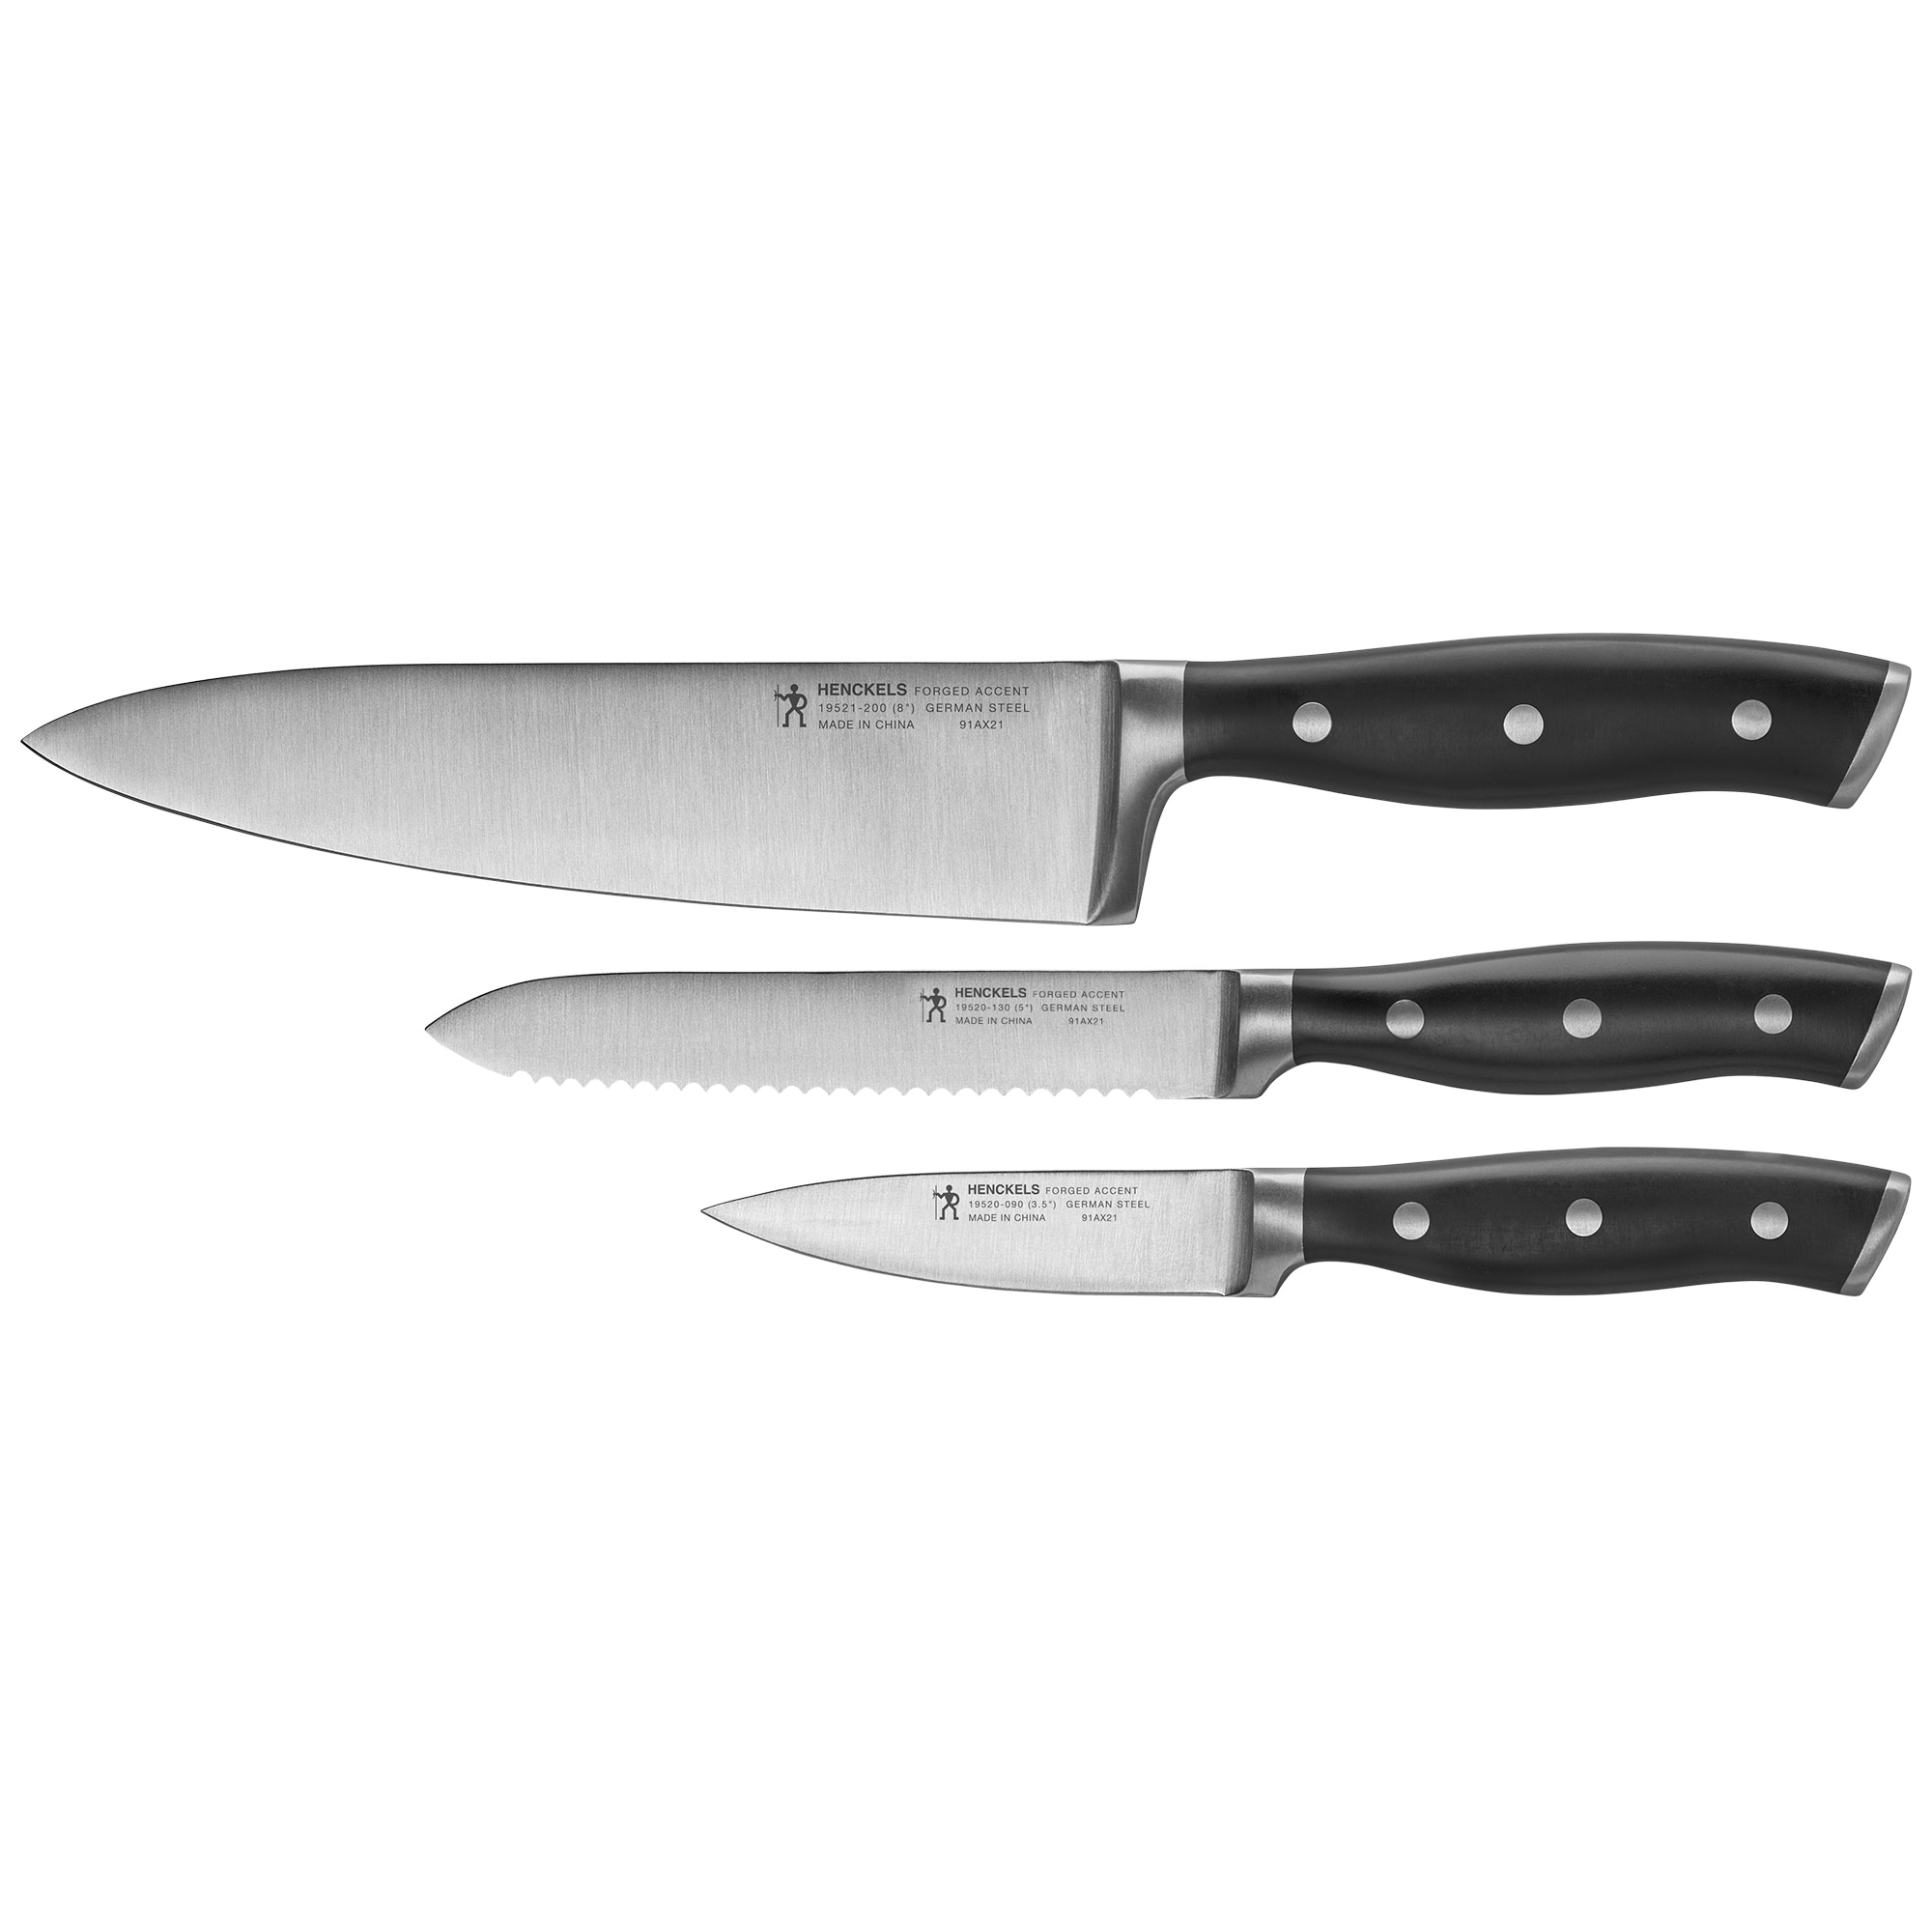 https://ak1.ostkcdn.com/images/products/is/images/direct/817e13a0cf8c975fbb20366bb2e987f2c3071fa5/Henckels-Forged-Accent-3-pc-Starter-Knife-Set.jpg